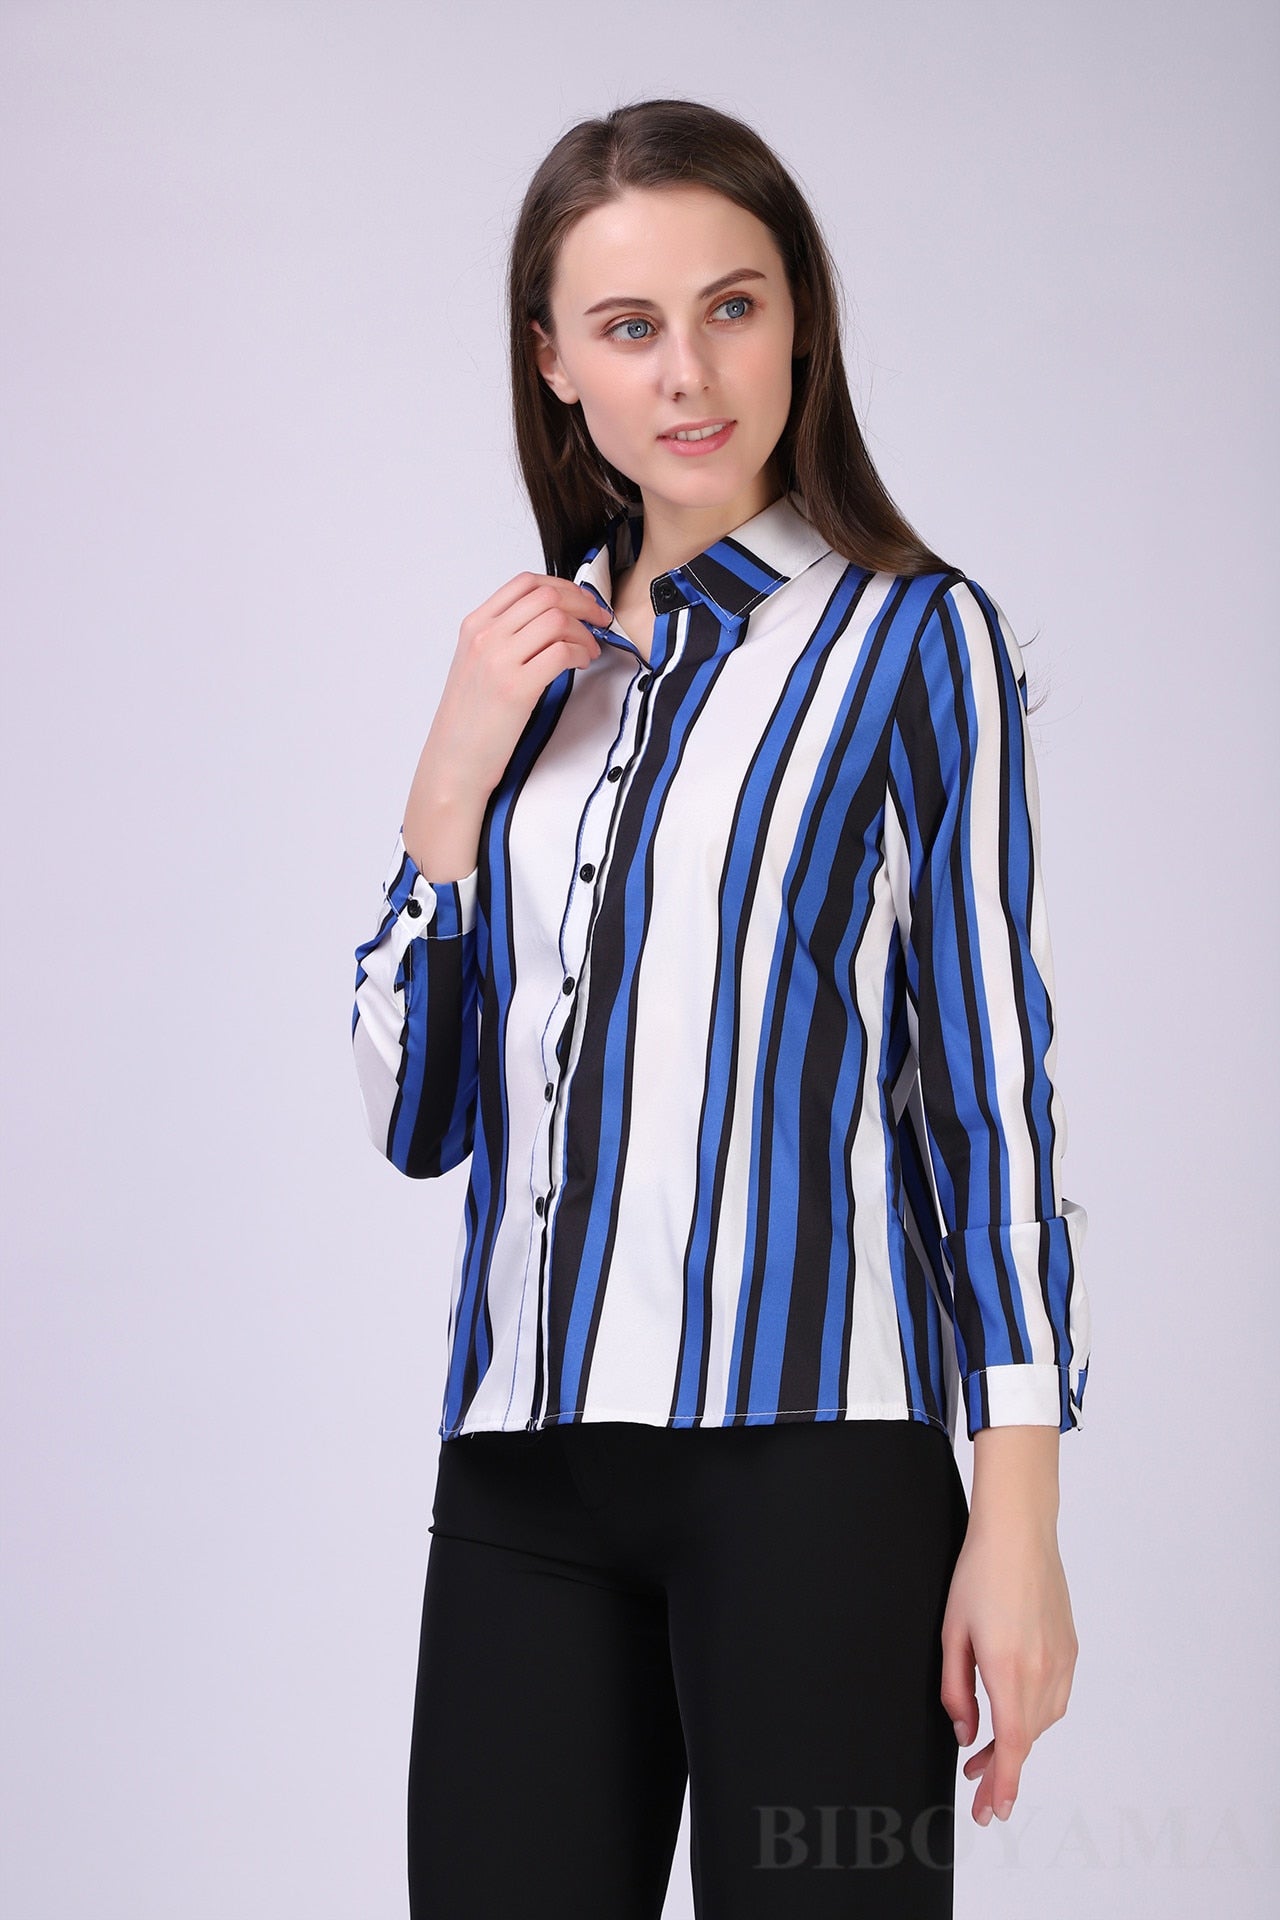 Blouse Women Chiffon Office Career Shirts Tops Fashion Casual Long Sleeve Blouses Femme Blusa - SixtyKey new model design Dubai fashion style 2021 best price